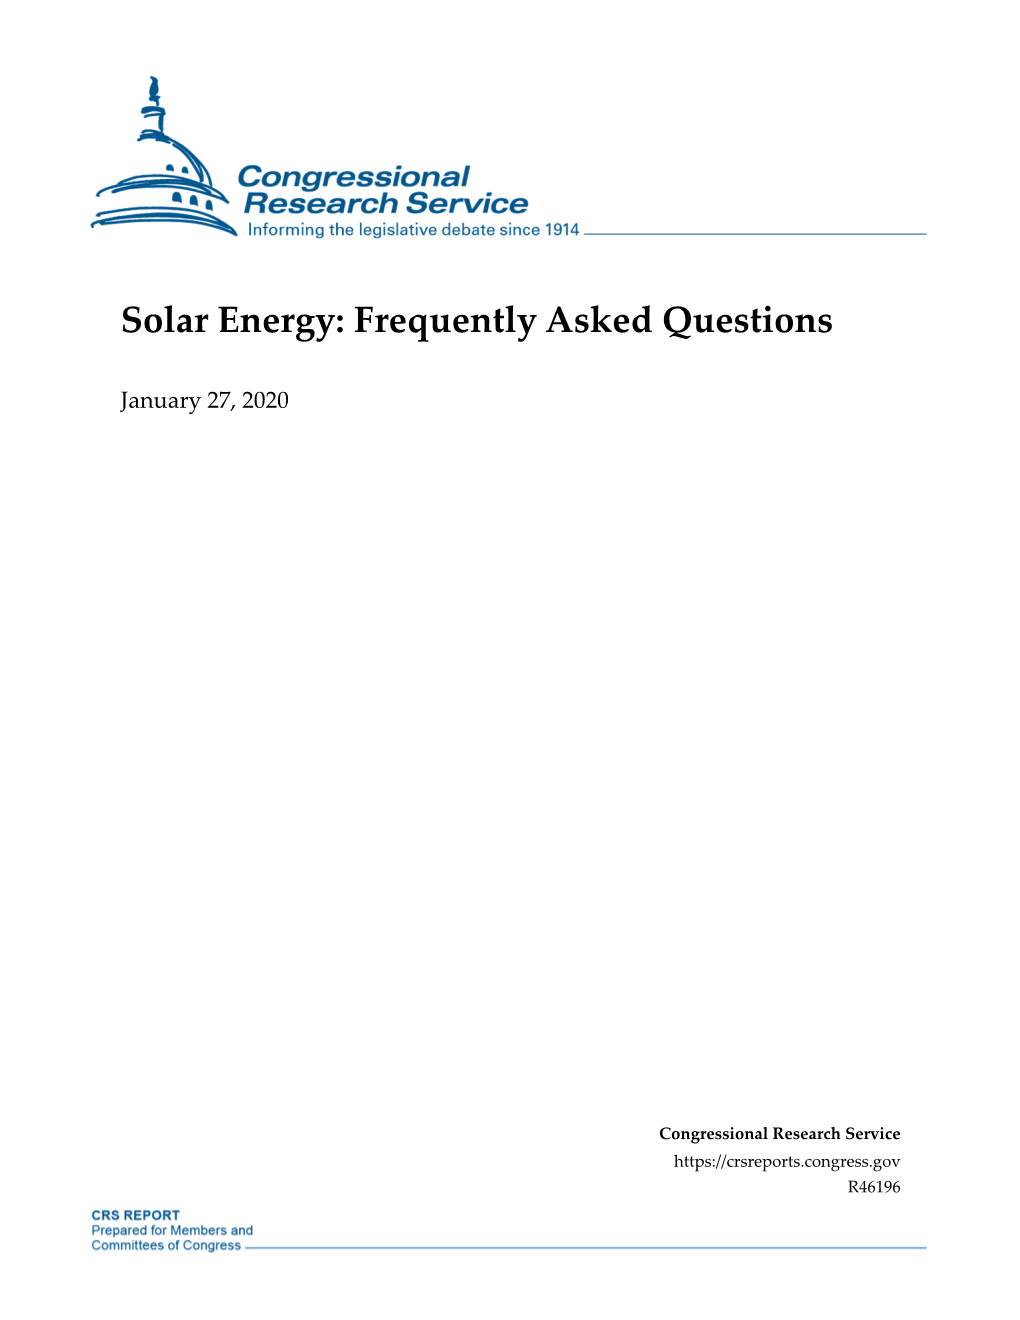 Solar Energy: Frequently Asked Questions